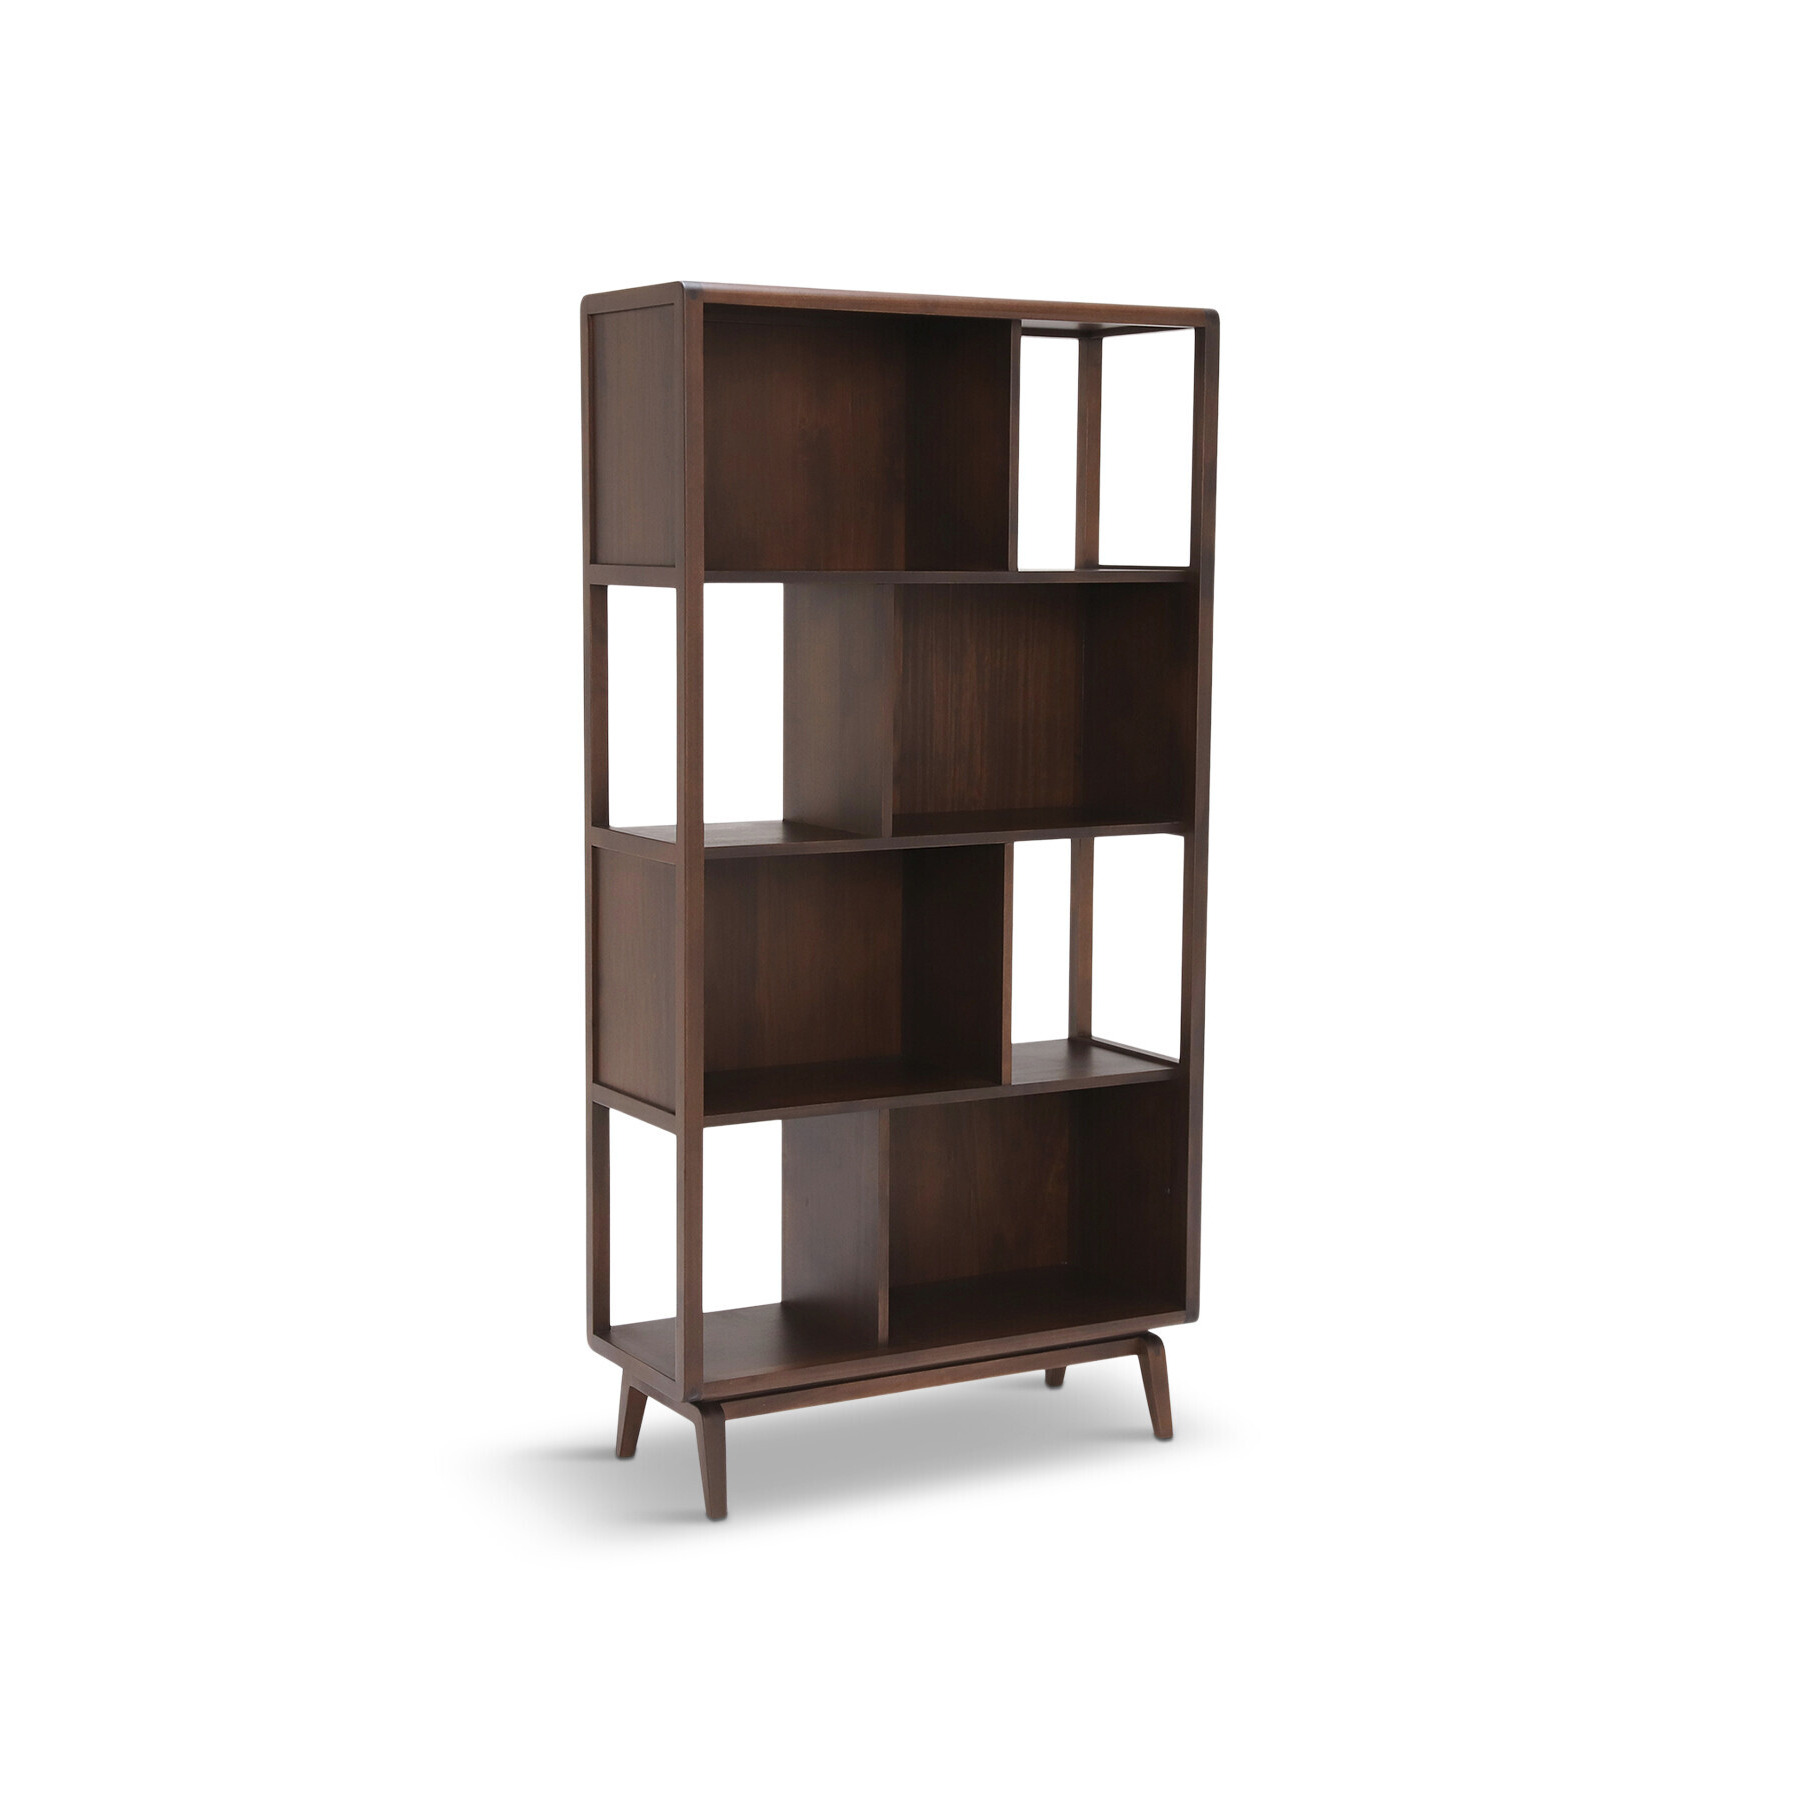 Barker and Stonehouse Ercol Lugo Shelving Unit Brown - image 1